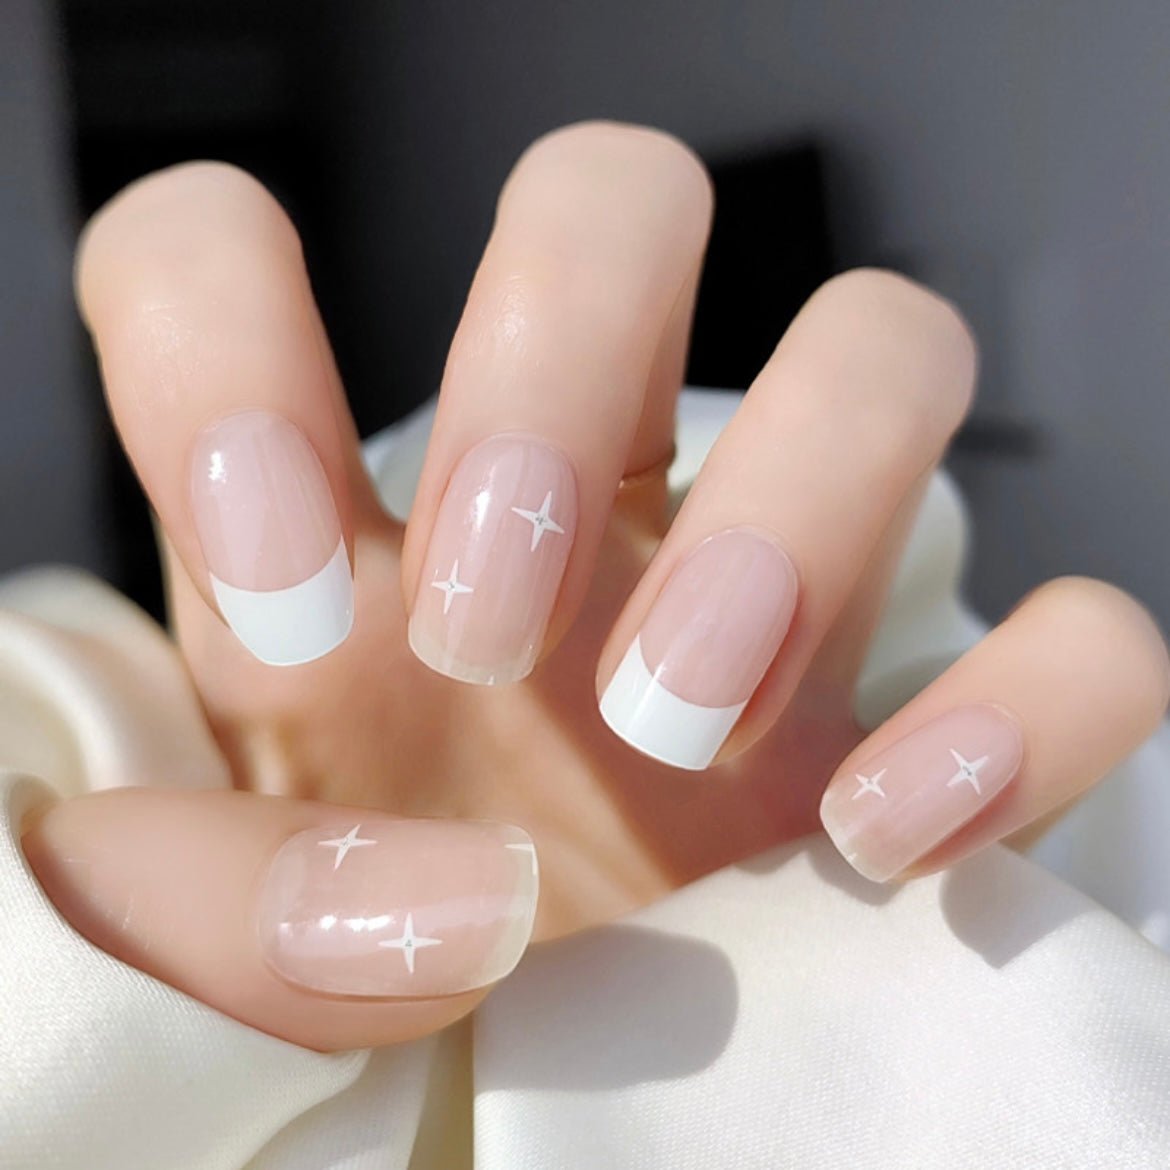 20 Best French manicure gel nails ideas | manicure, gel nails, nails